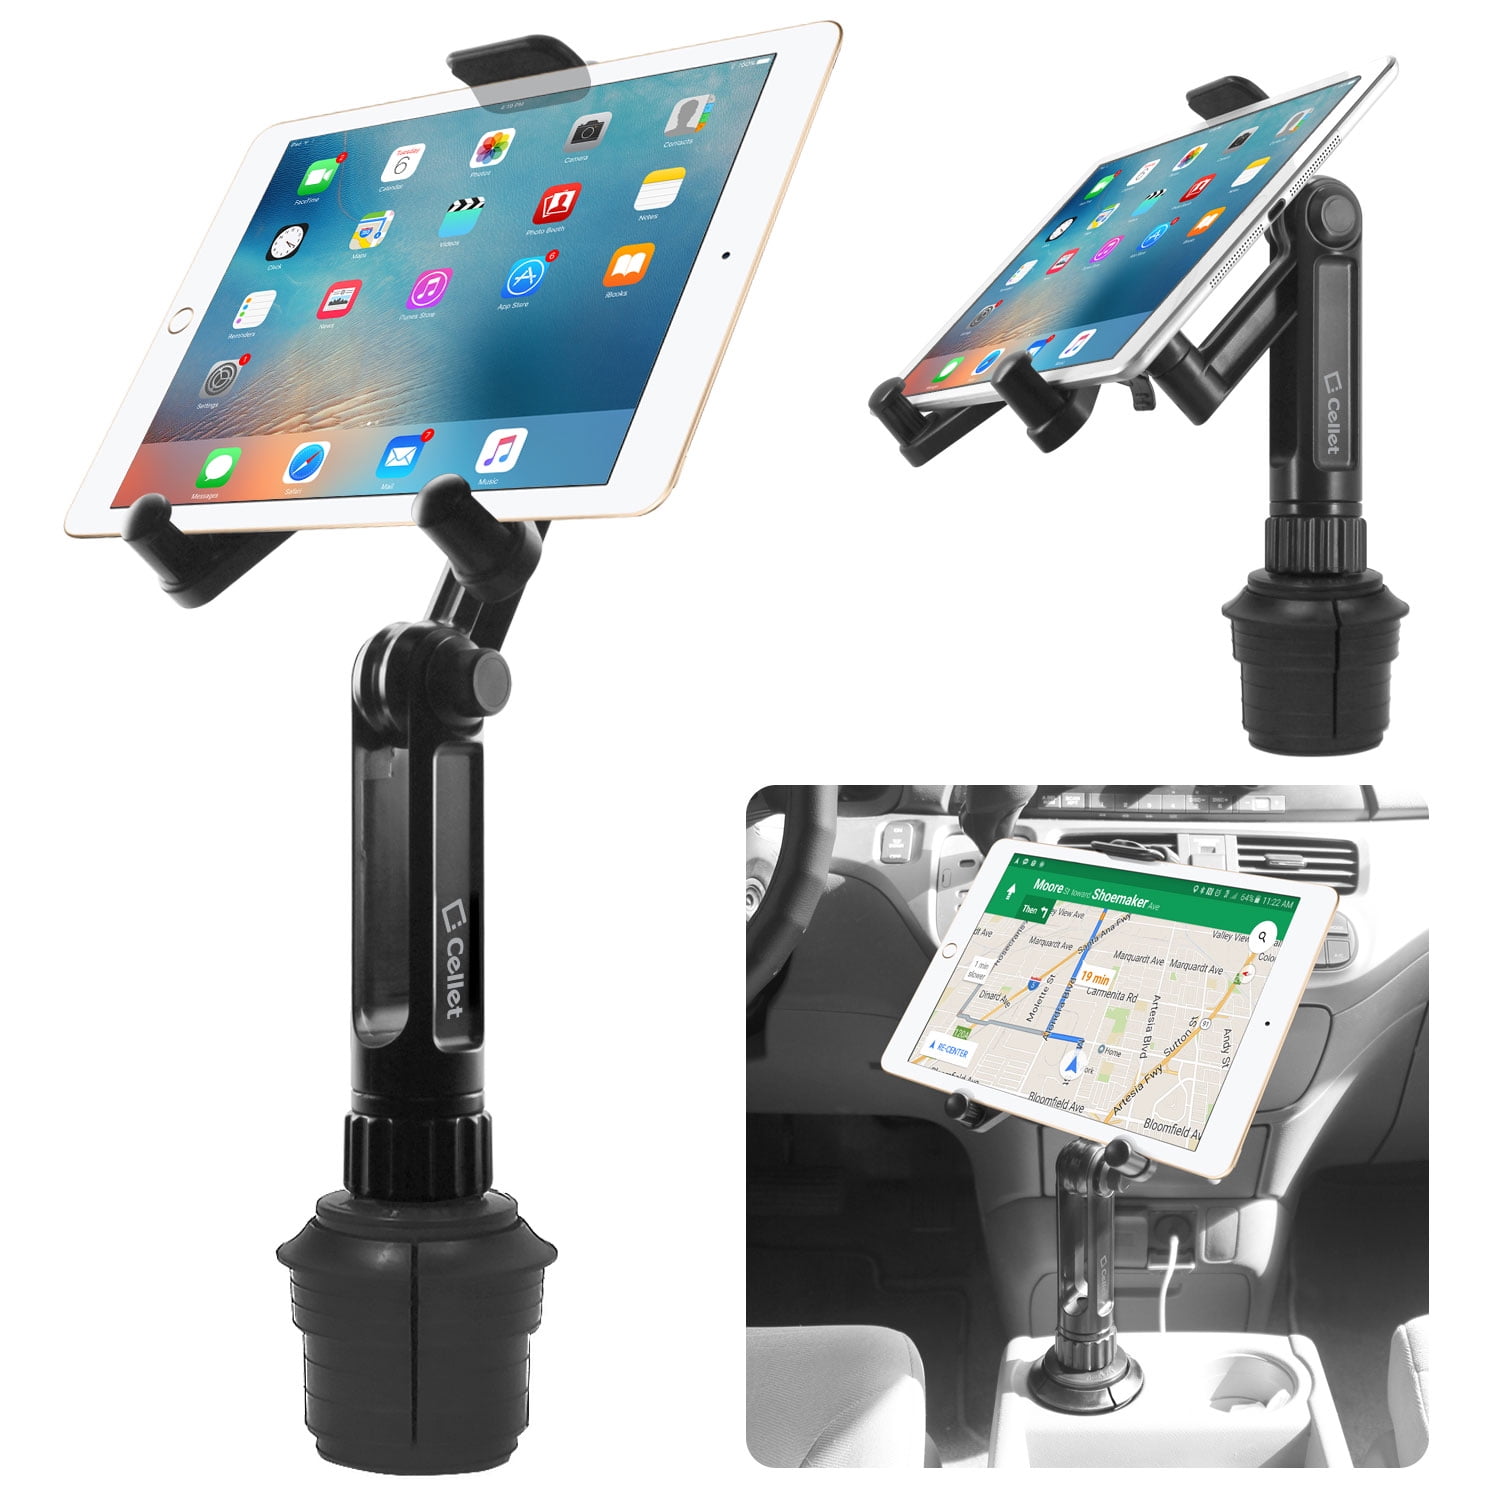 Dedicated Vehicle Car Drink Cup Holder Base Tablet Mount for iPad Mini 4 